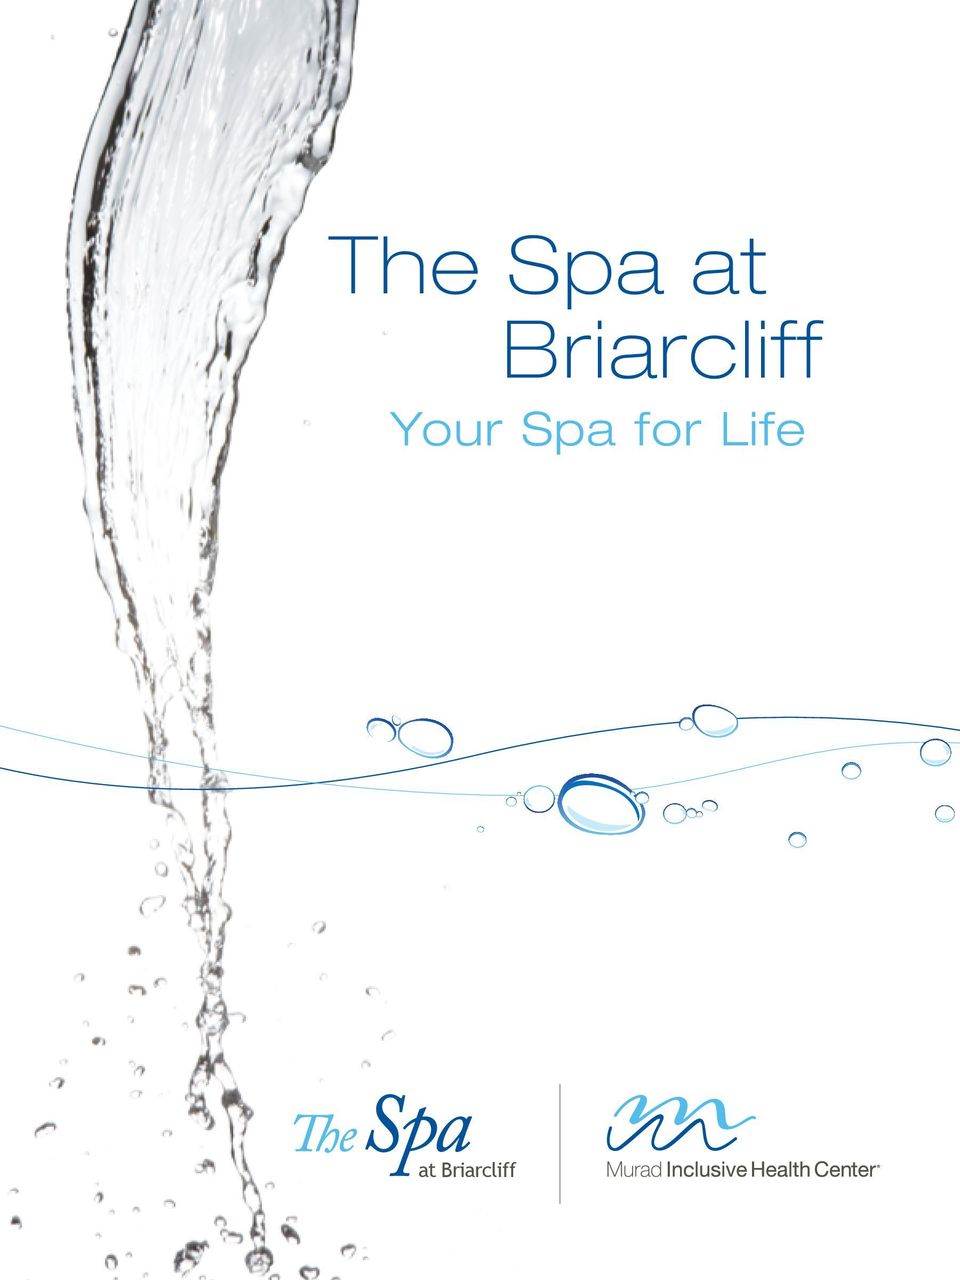 Your Spa for